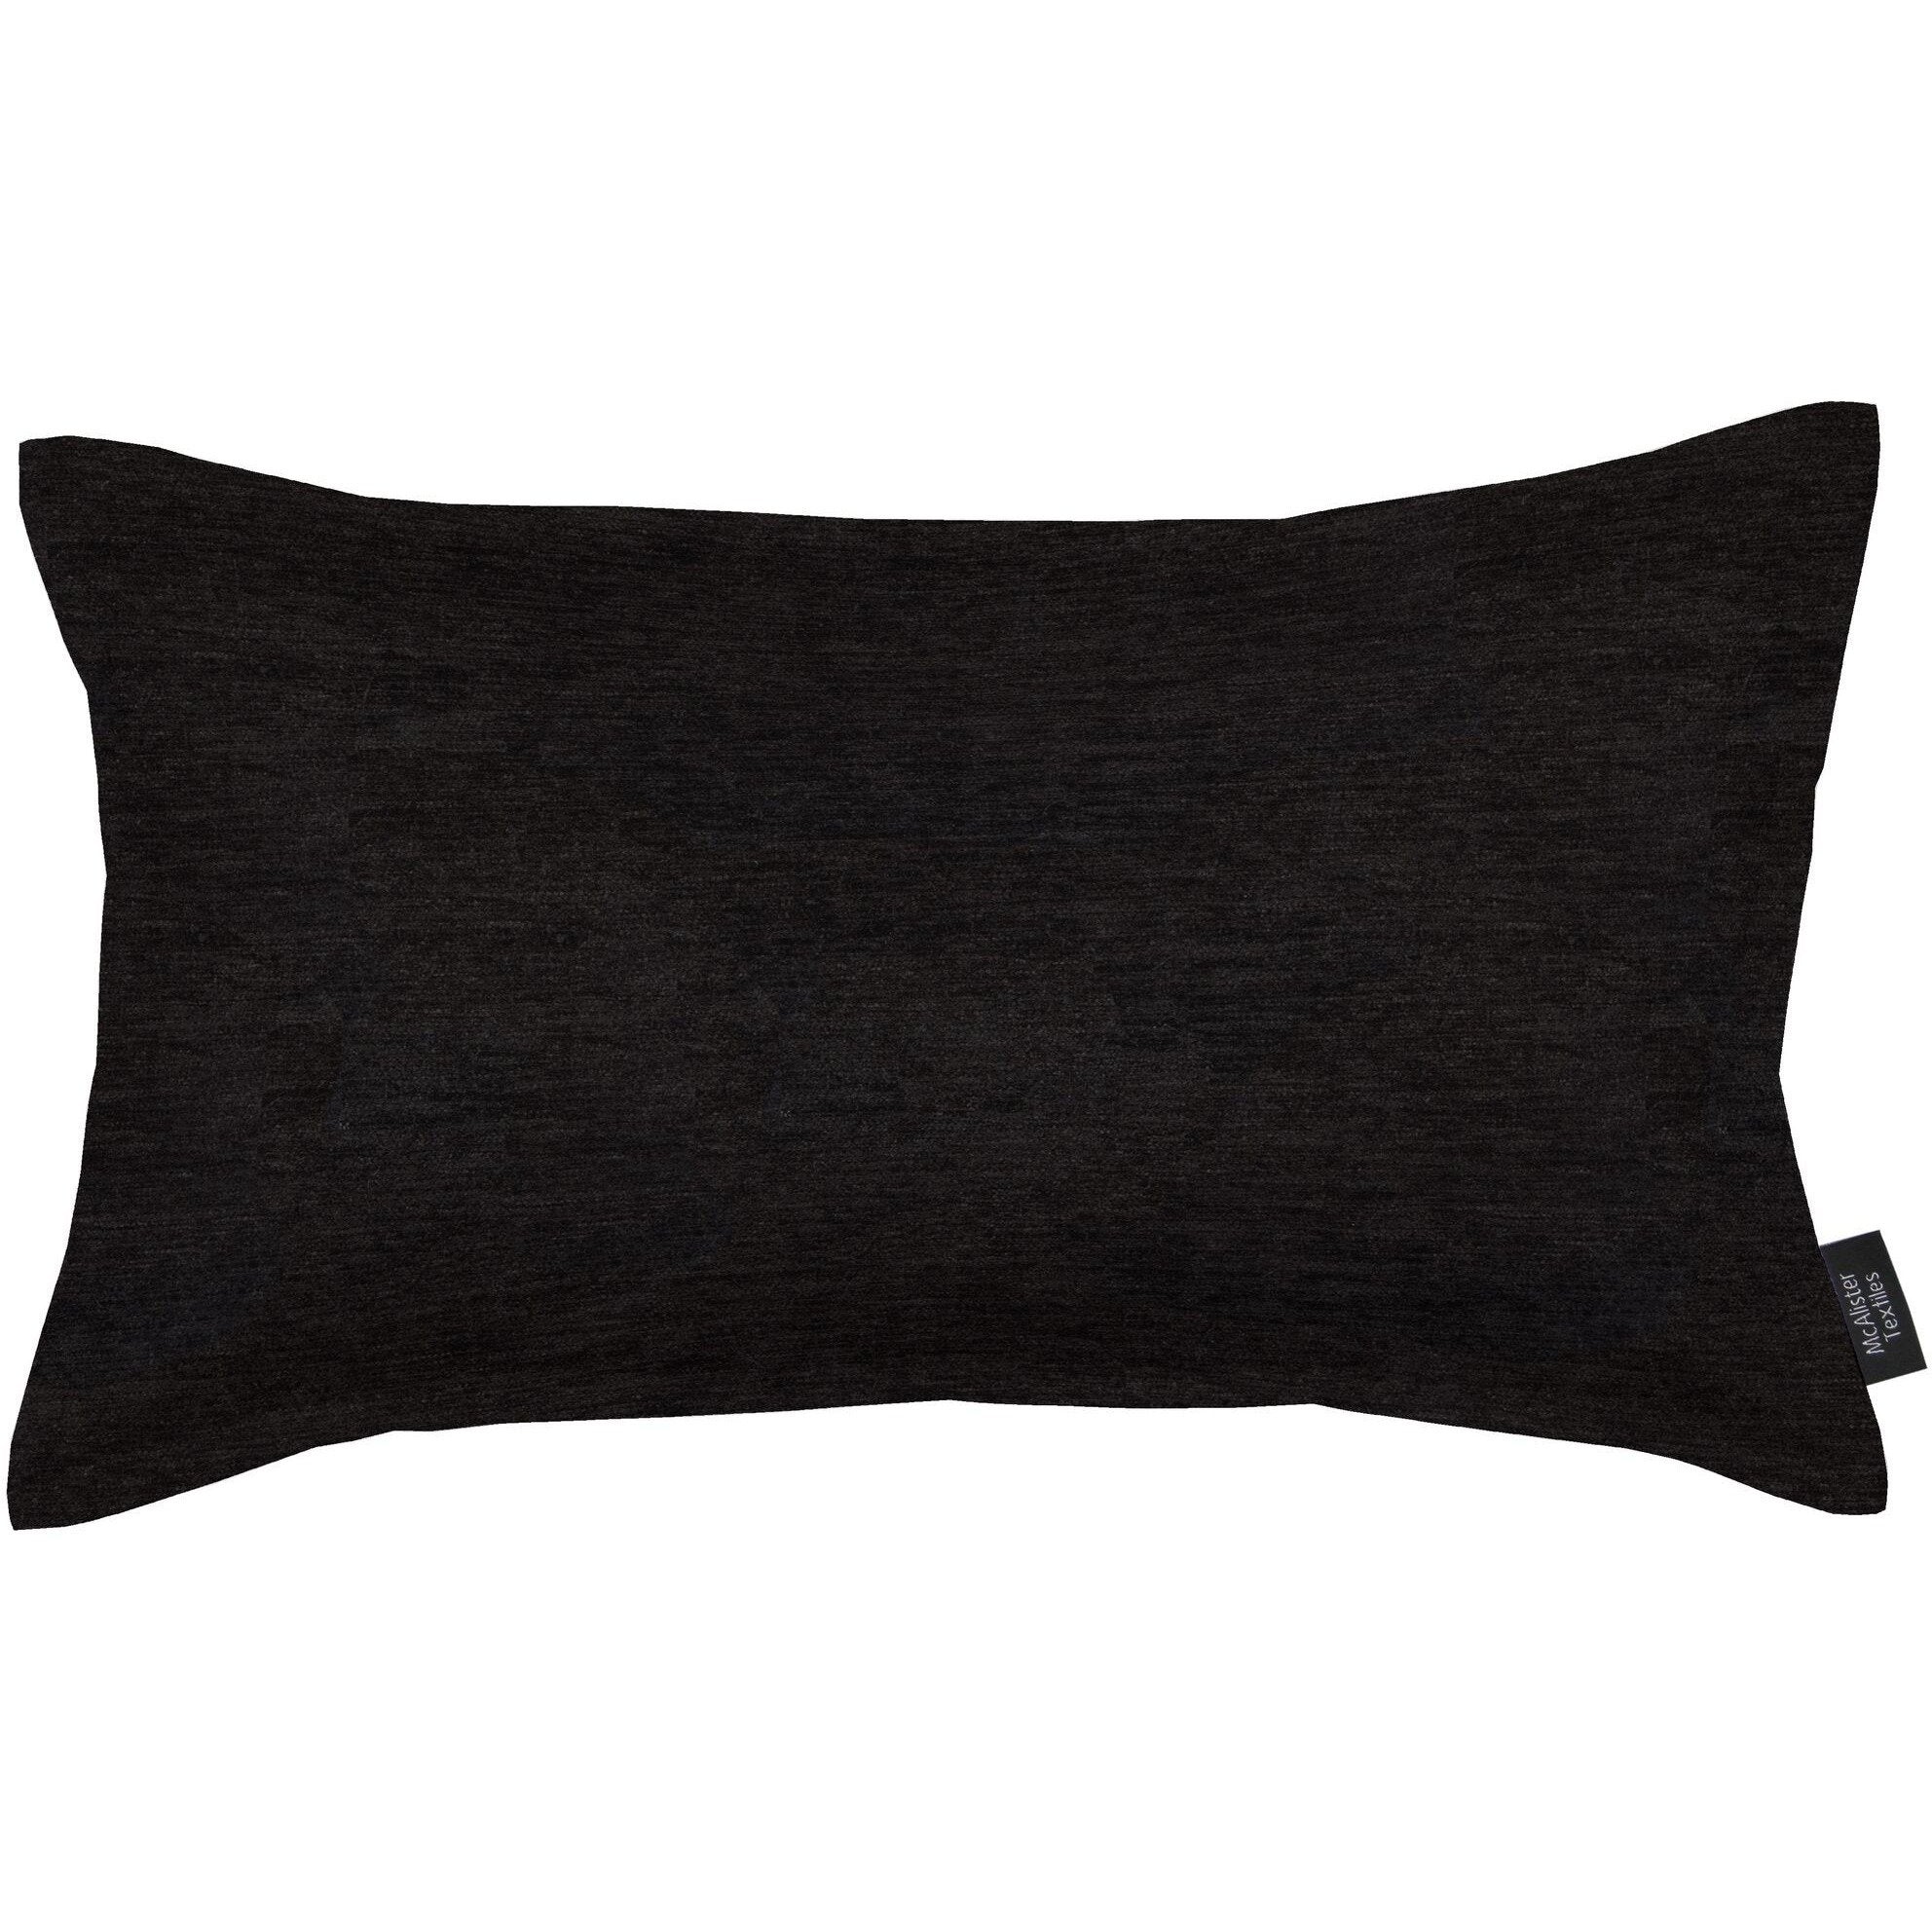 McAlister Textiles Plain Chenille Black Cushion Cushions and Covers Cover Only 50cm x 30cm 